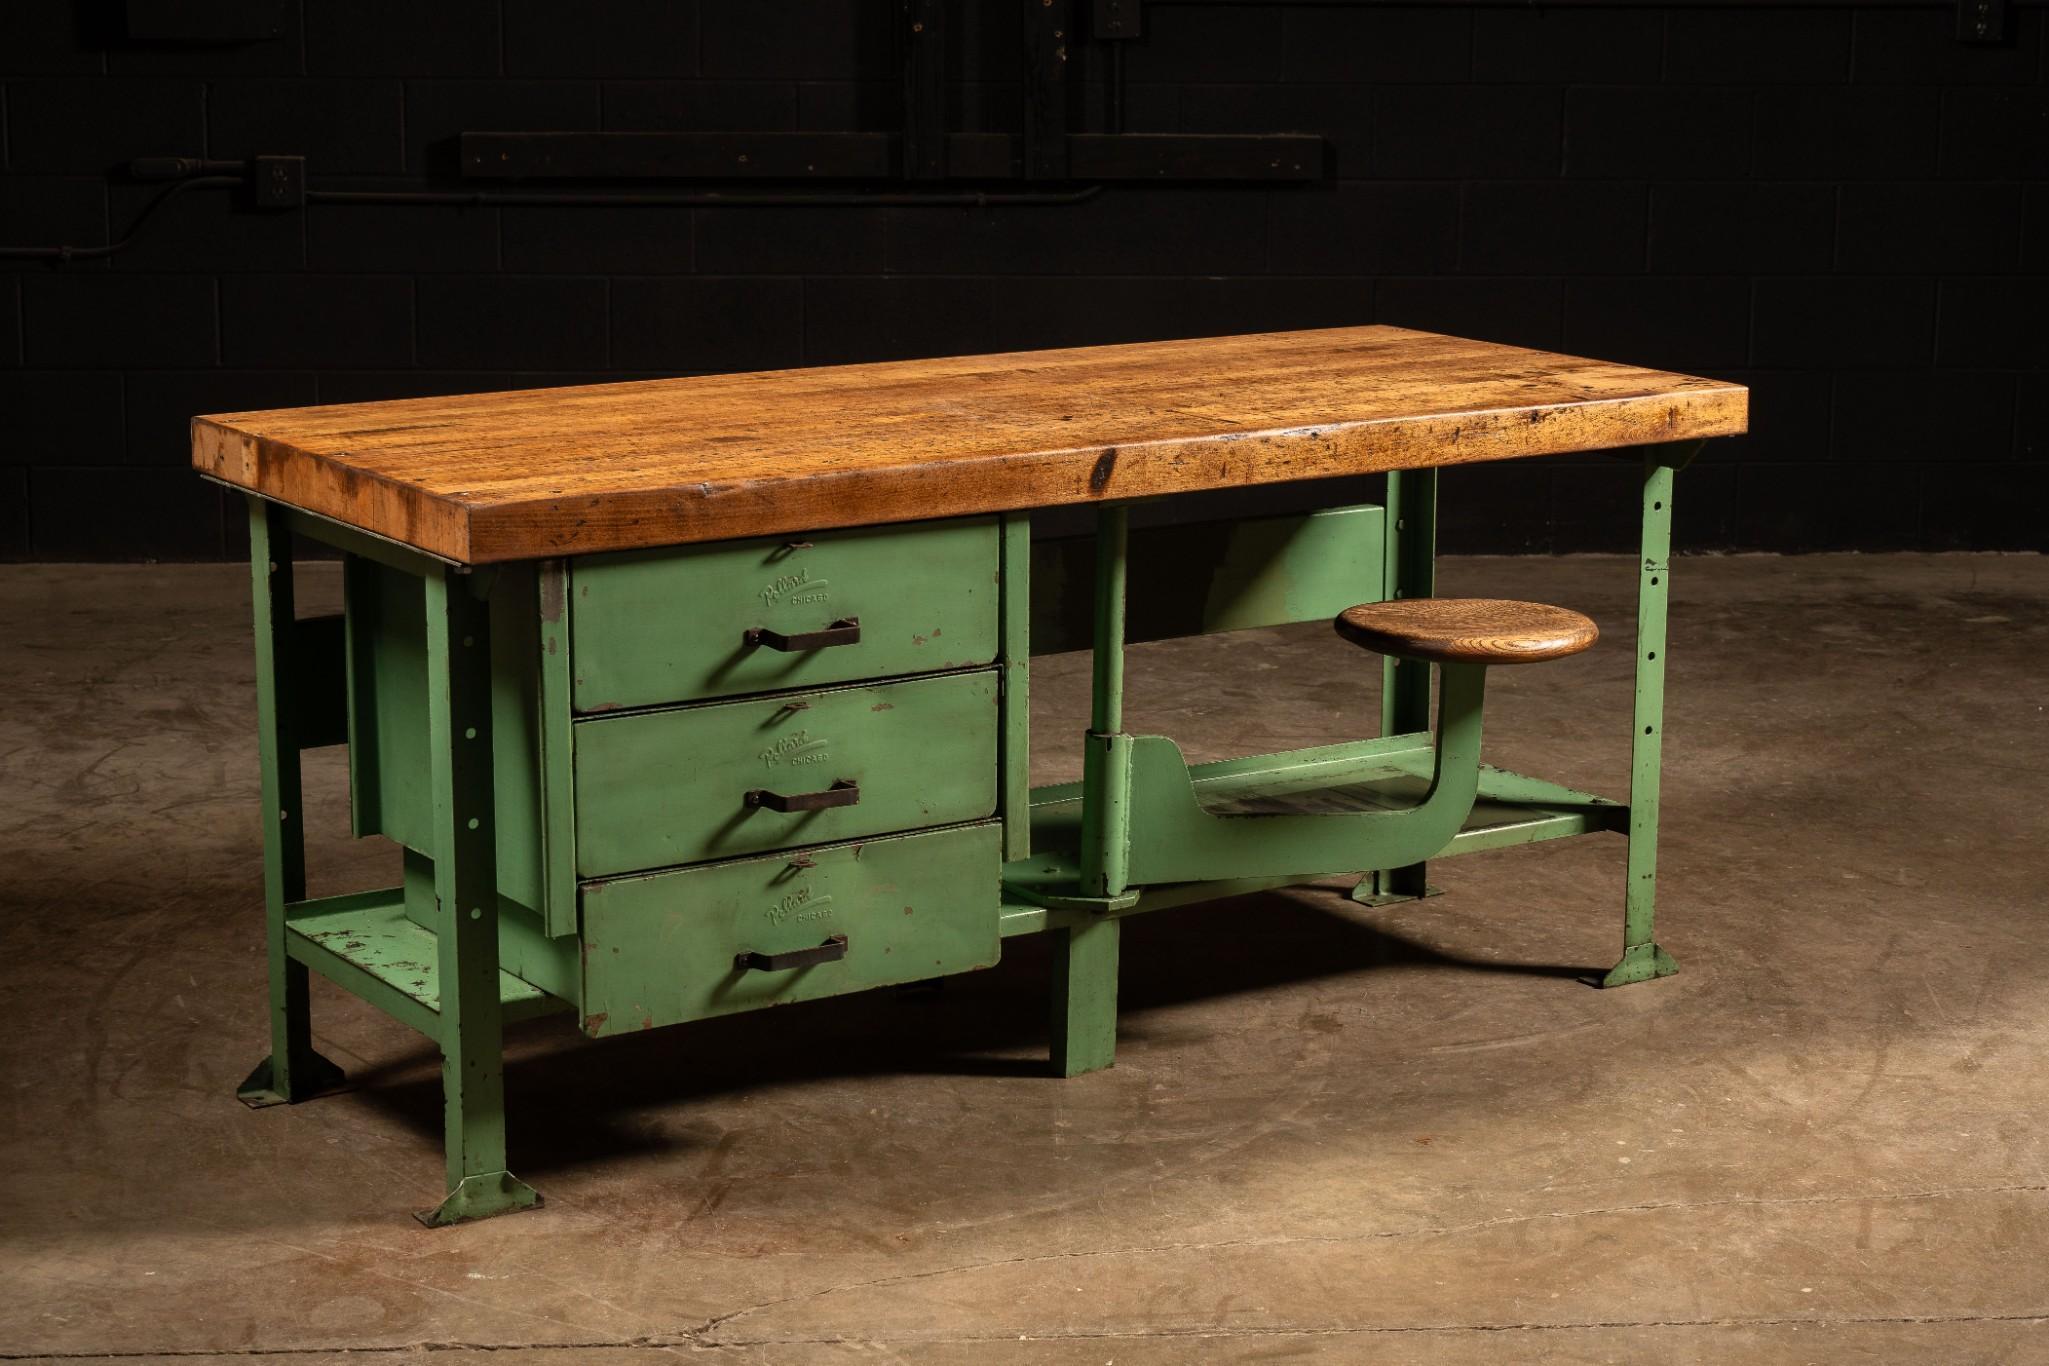 Antique Butcher Block Workbench with Swing Stool